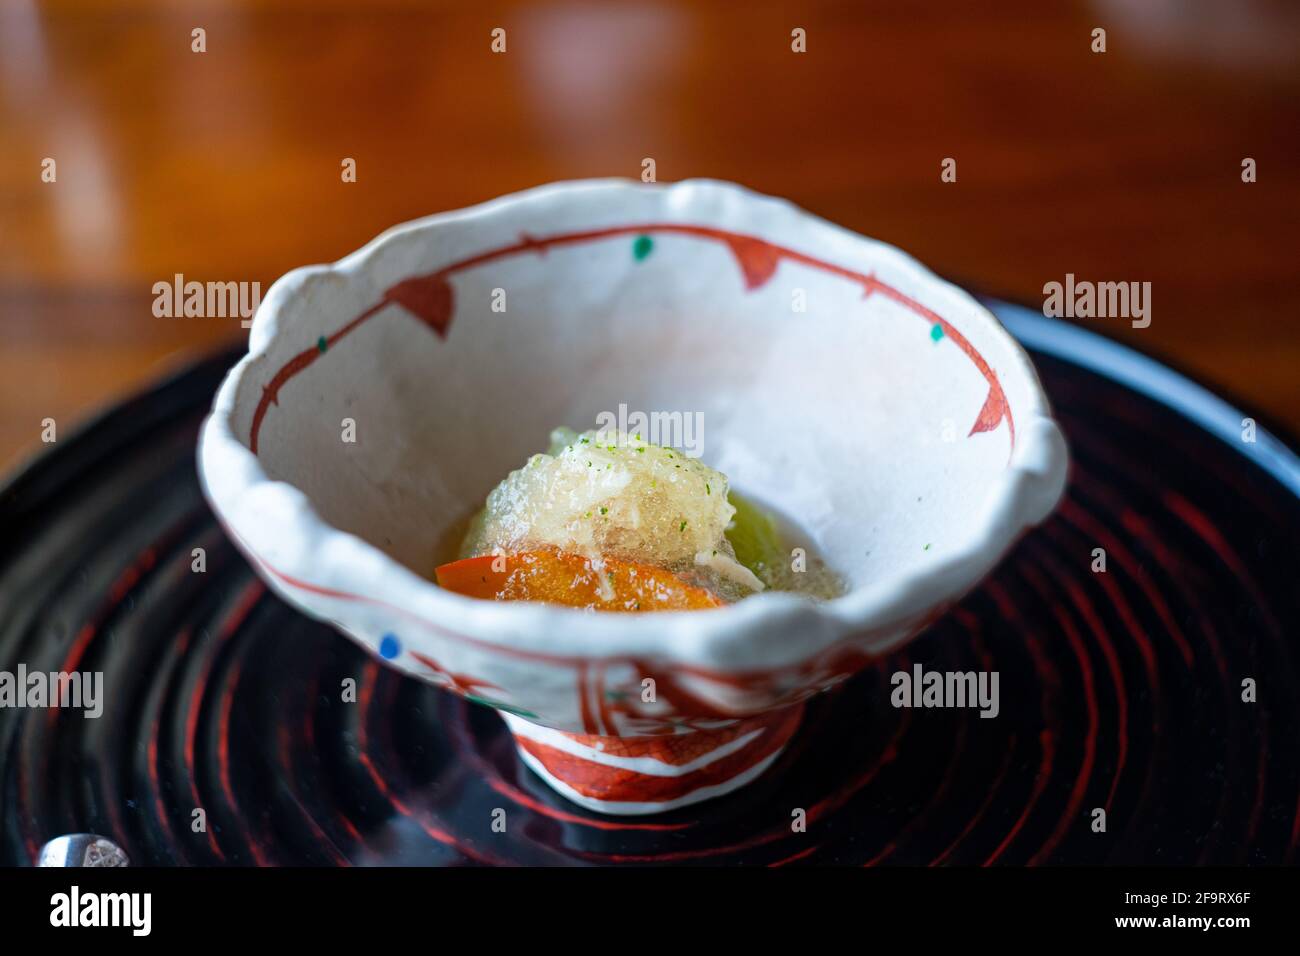 Closeup of a decorative bowl with typical French gelatin dish Stock Photo